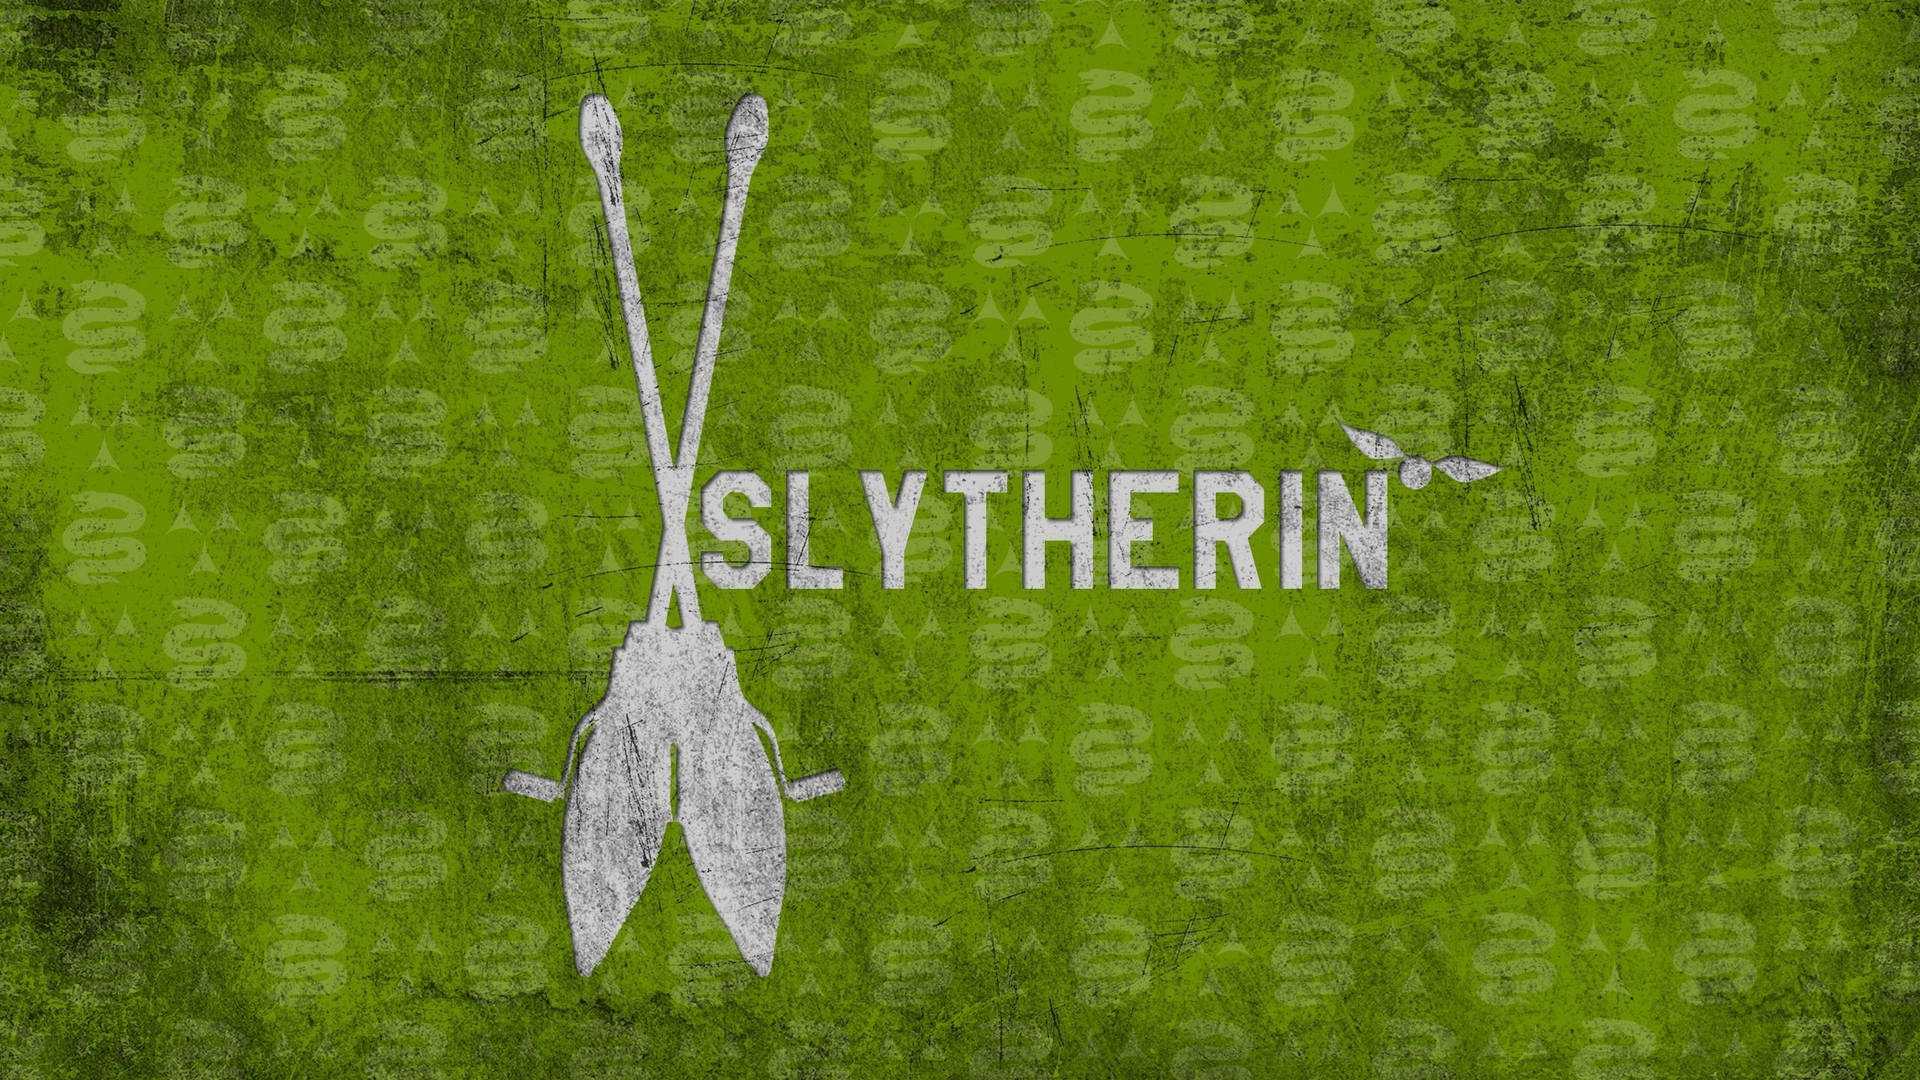 Slytherin Aesthetic Poster In Lime Green Wallpaper